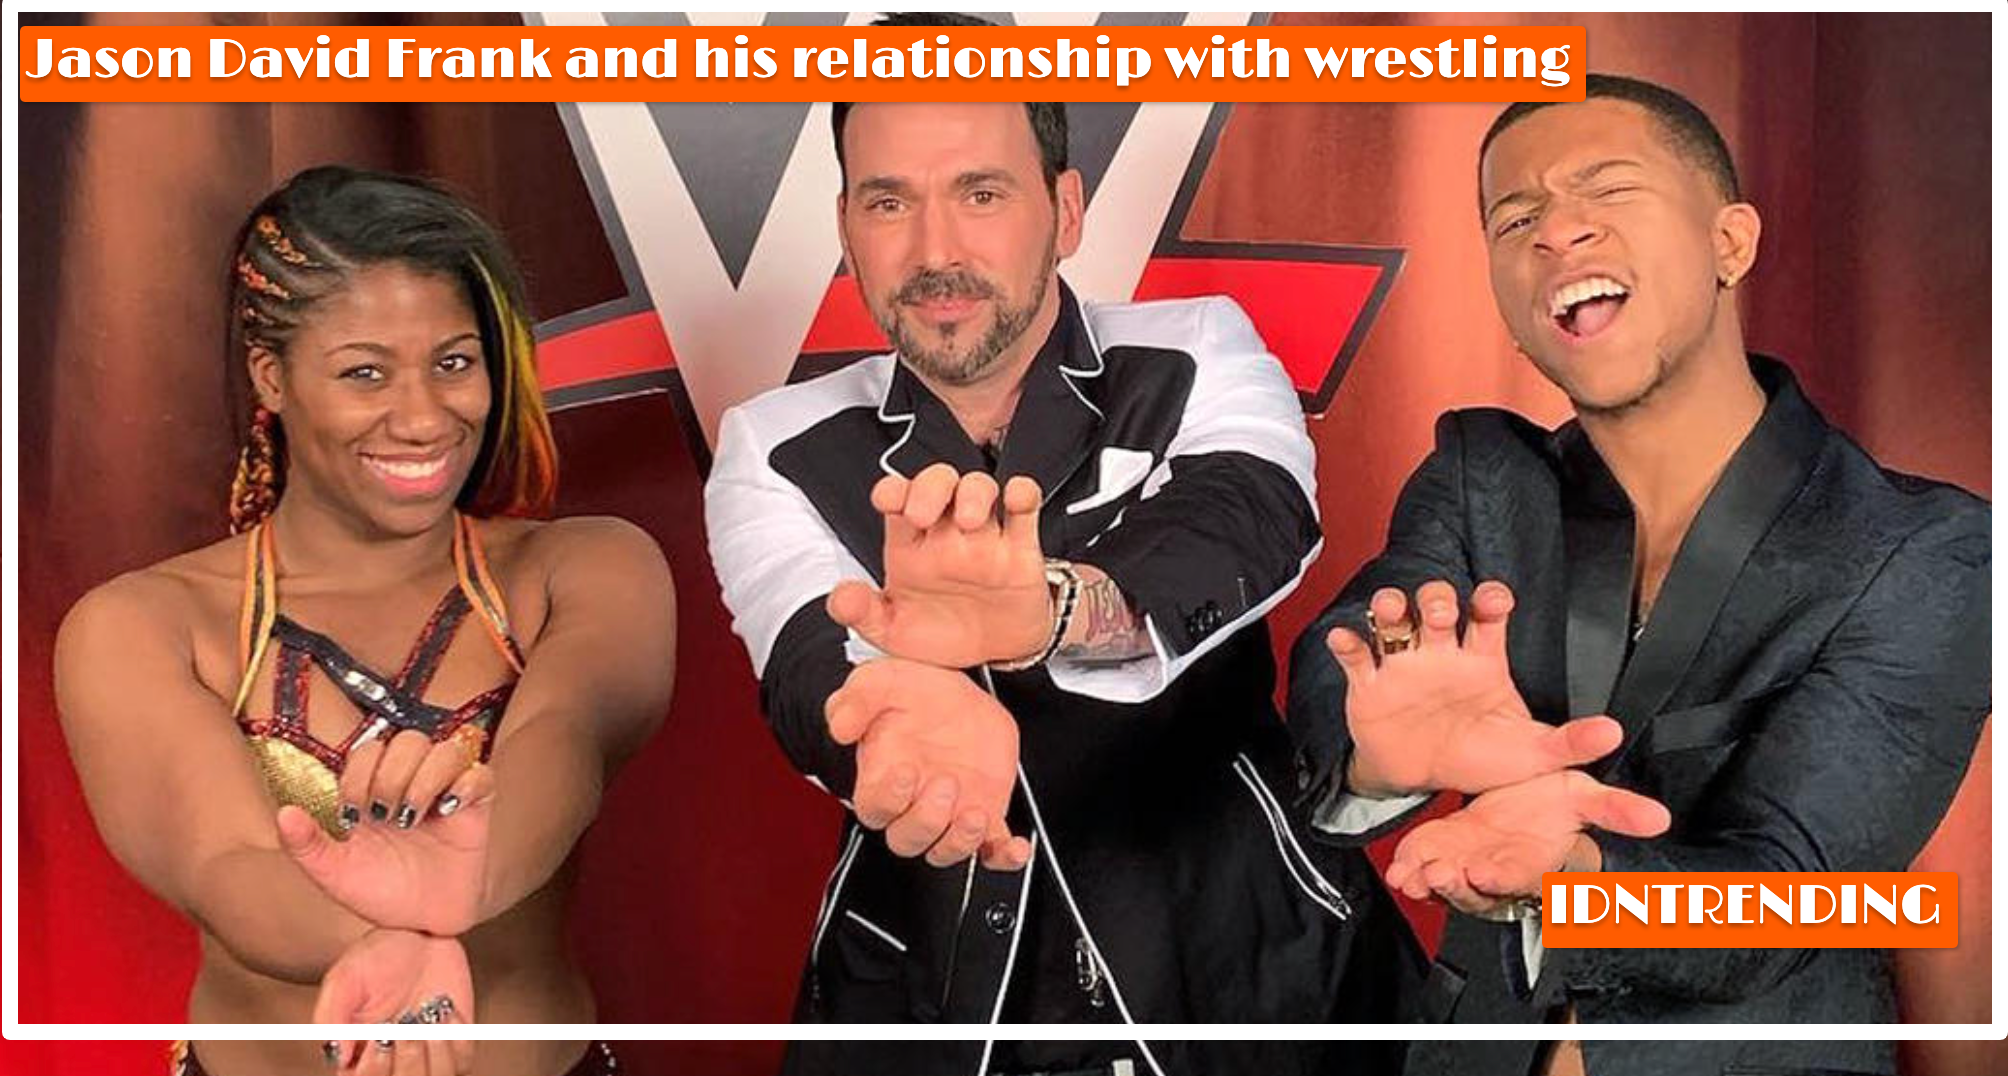 Jason David Frank and his relationship with wrestling